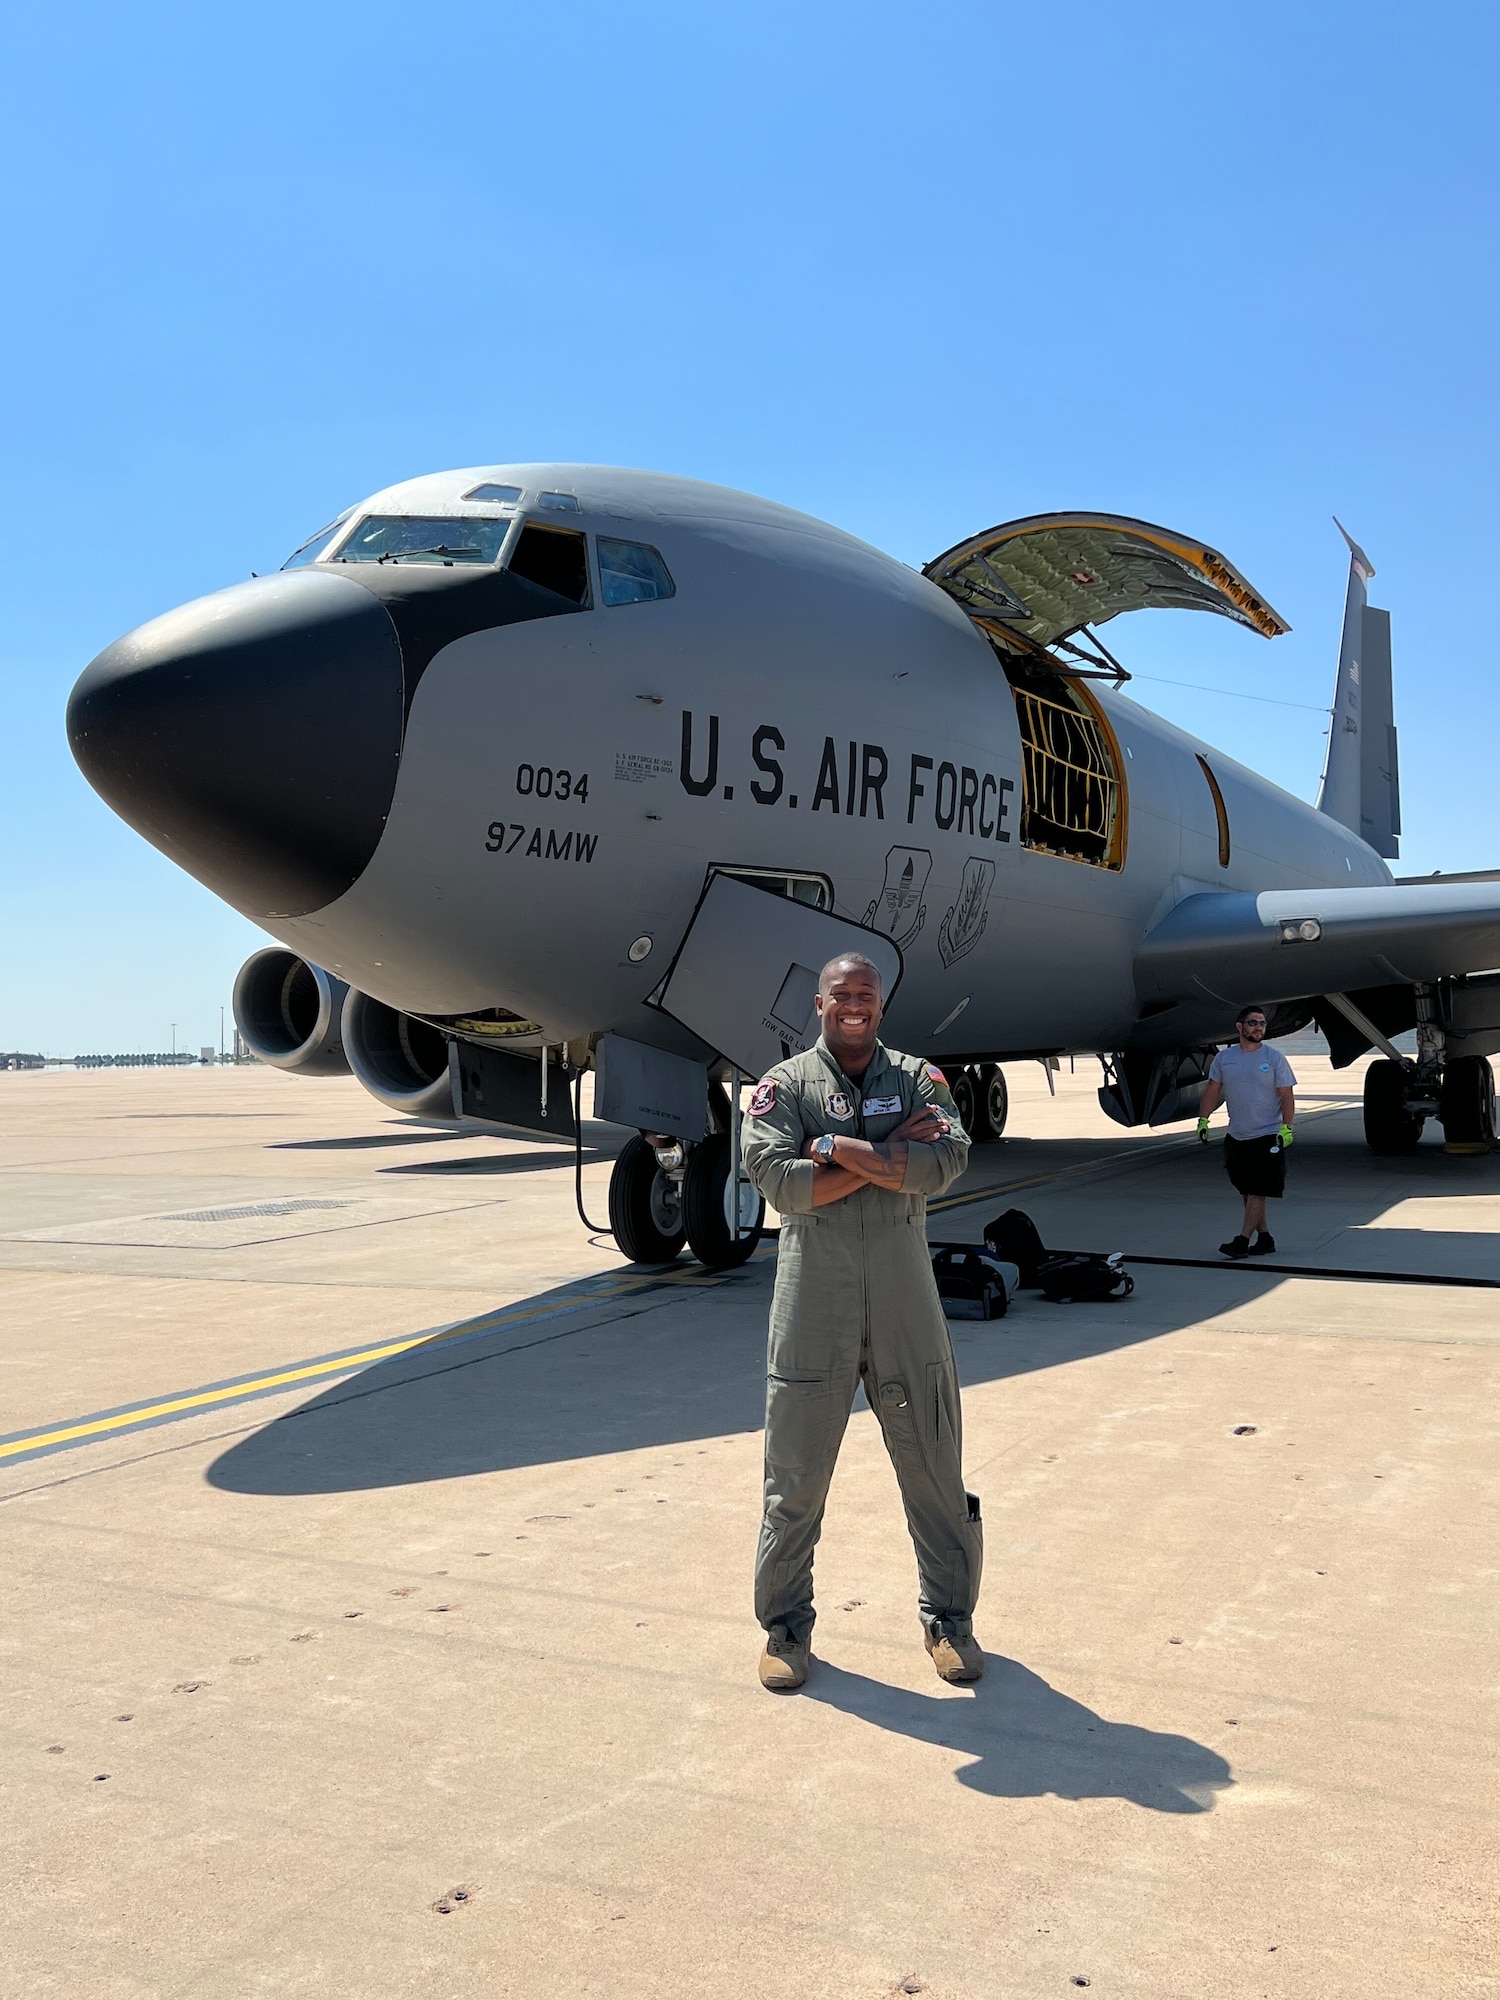 U.S. Air Force 2nd. Lt. Bryan Lee, 54th Air Refueling Squadron KC-135 Stratotanker student pilot, poses with the KC-135 in Altus, Oklahoma, on August 26, 2022. Lee is a reservist and is returning back to his unit in Tampa, Florida after training. (U.S. Air Force courtesy photo by 2nd Lt. Bryan Lee)